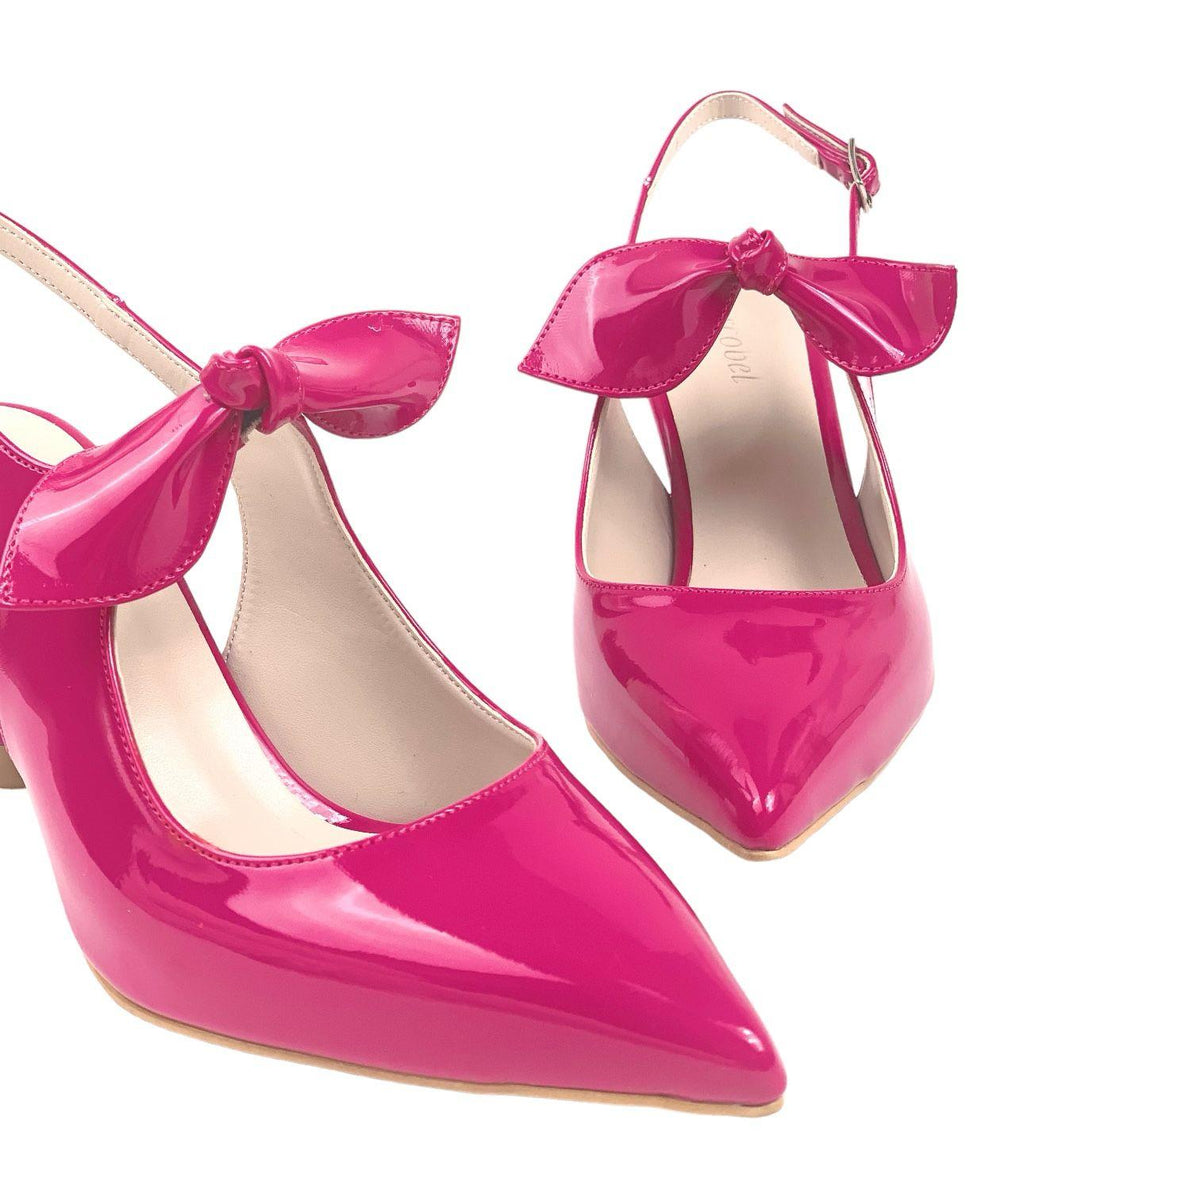 Women's Fuchsia Patent Leather Material Tanb Bow Detailed Heeled Pointed Toe Shoes 7 cm Heel - STREETMODE ™